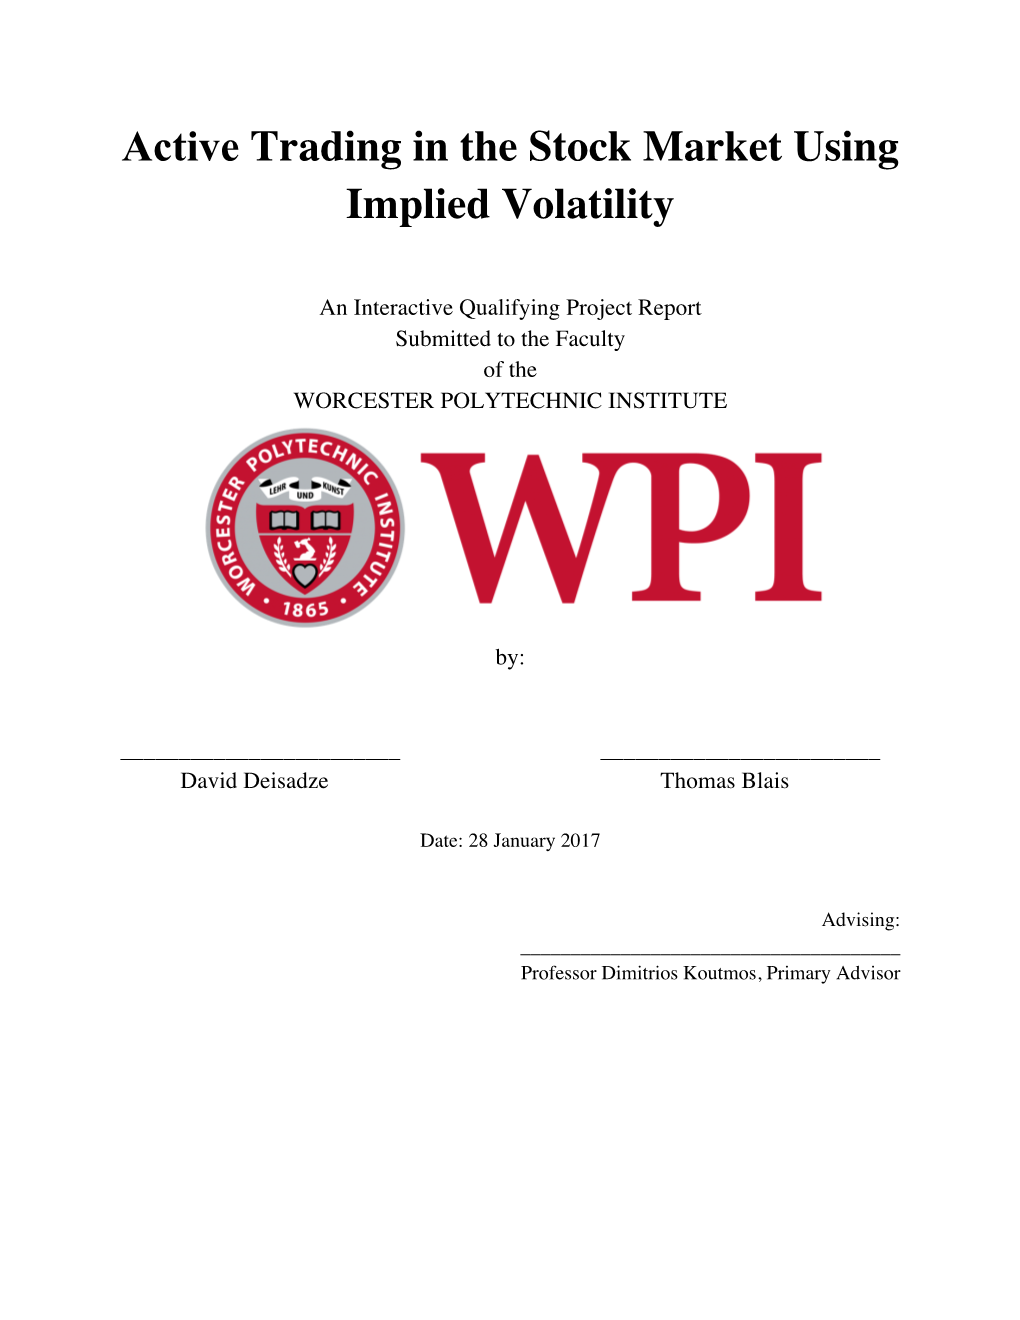 Active Trading in the Stock Market Using Implied Volatility